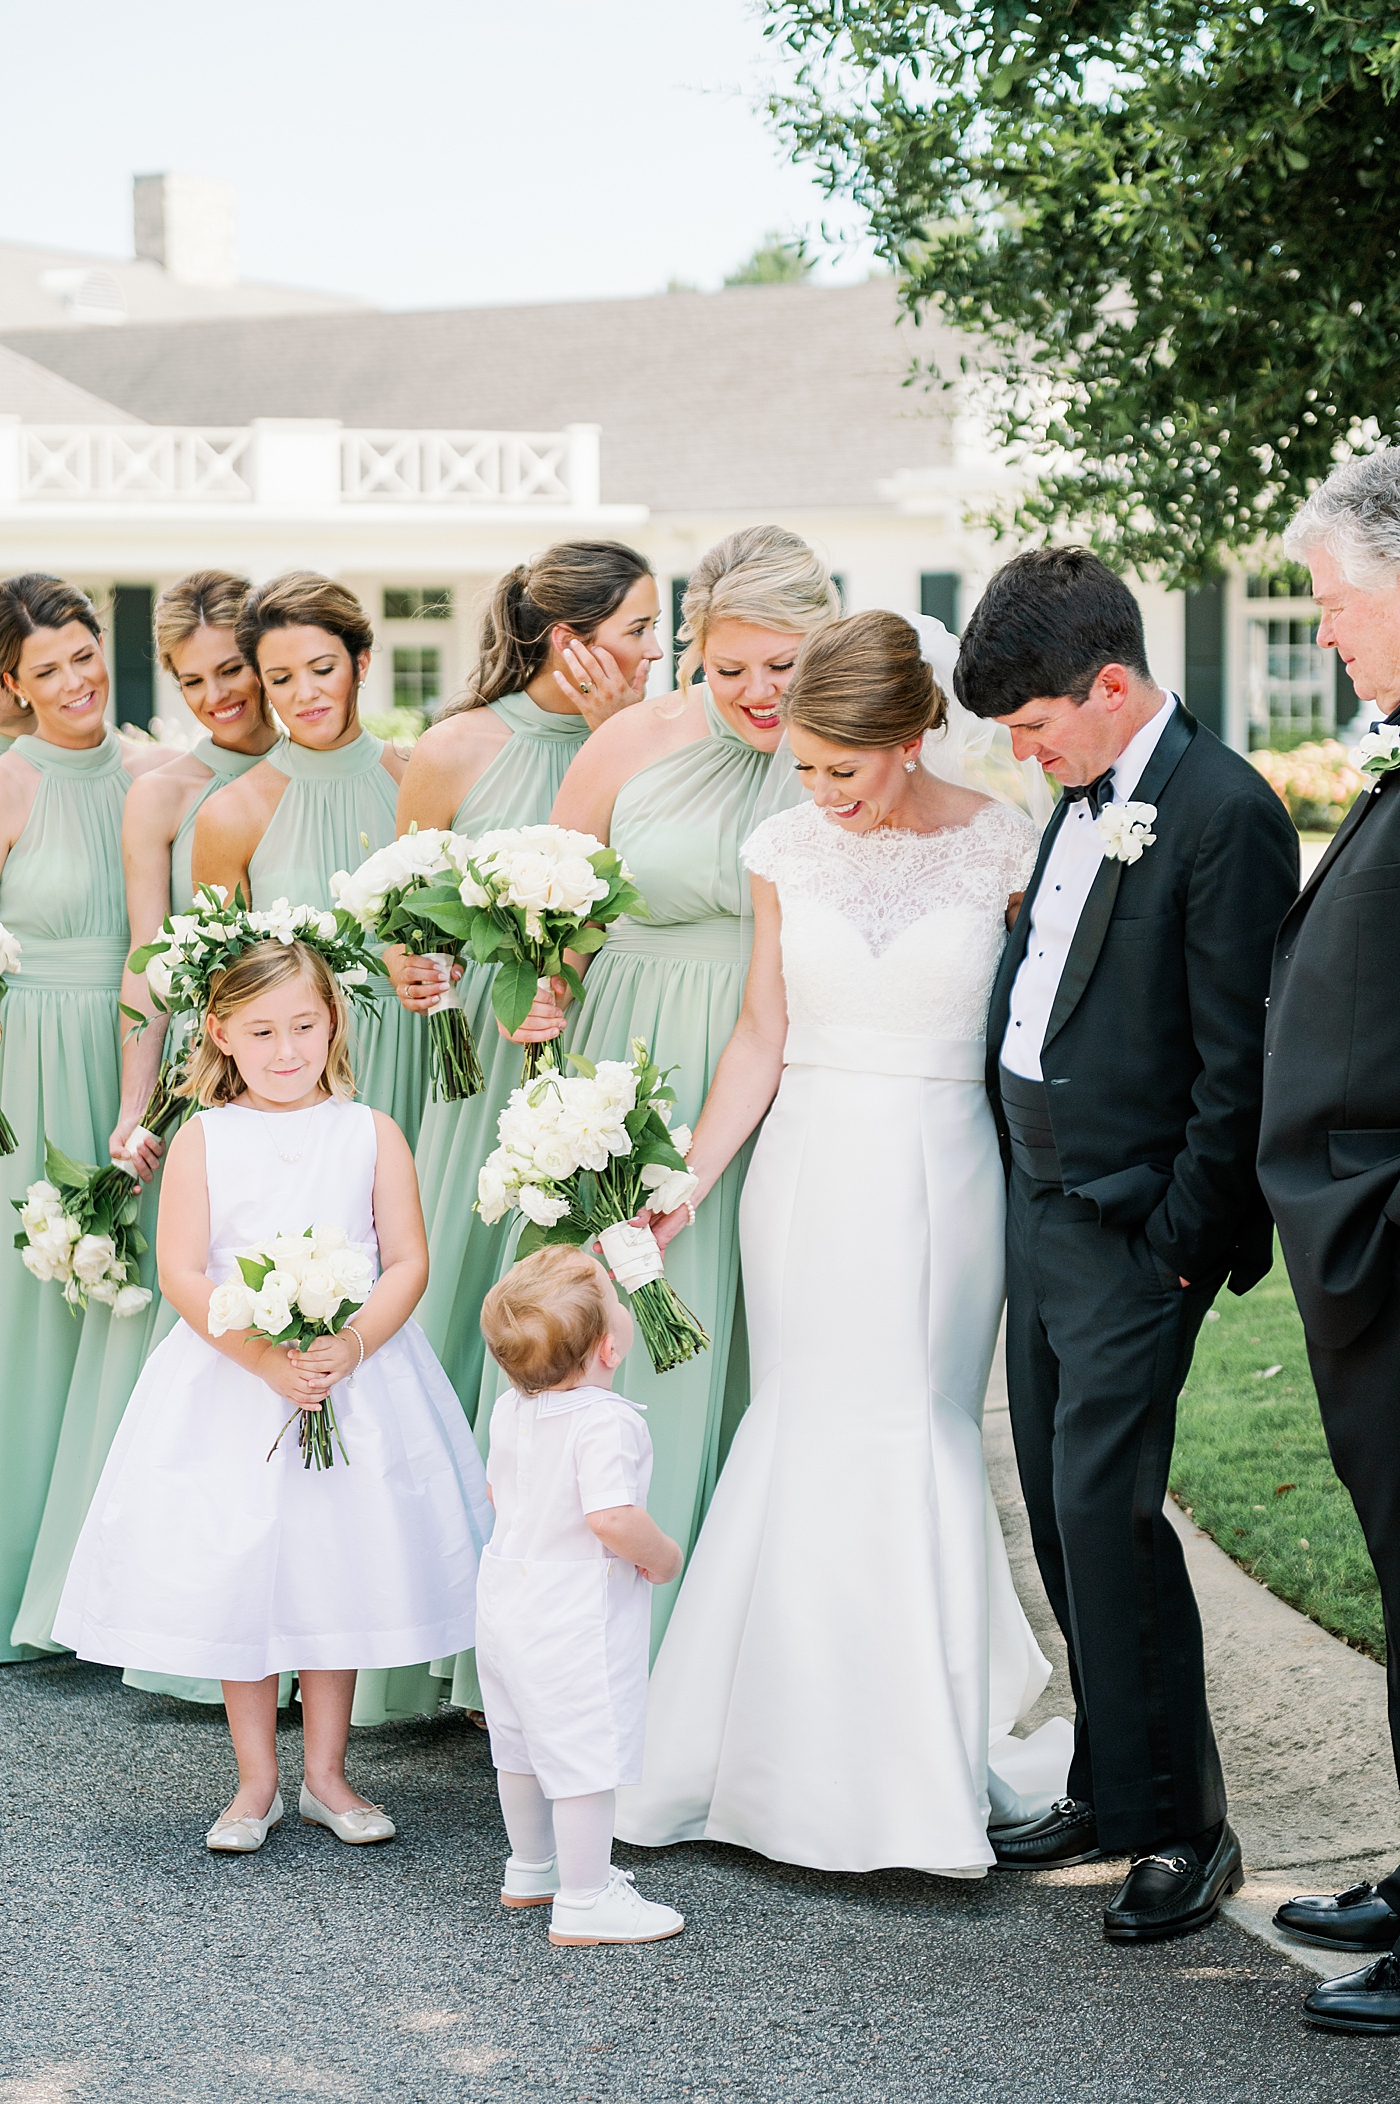 Bride and groom interacting with flower girl and ring bearer | Image by Annie Laura Photo